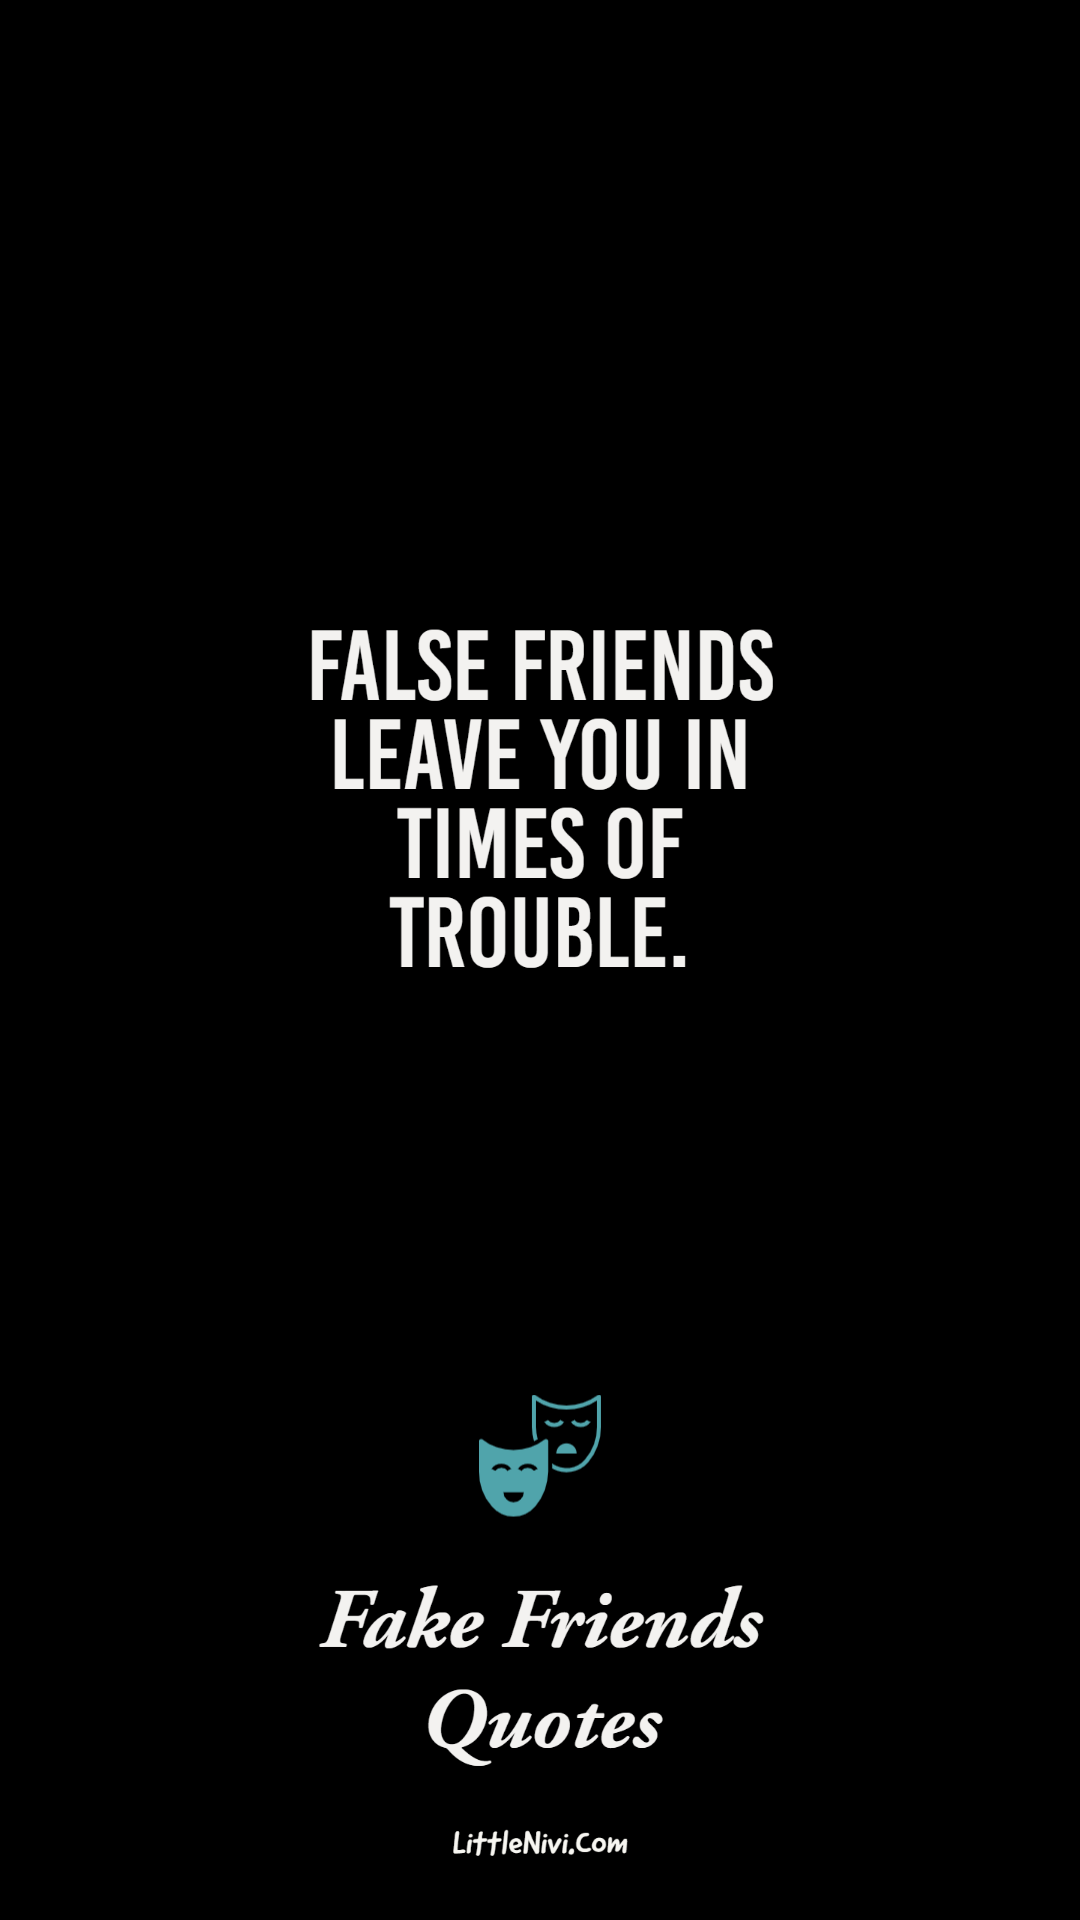 fake friends quotes for instagram